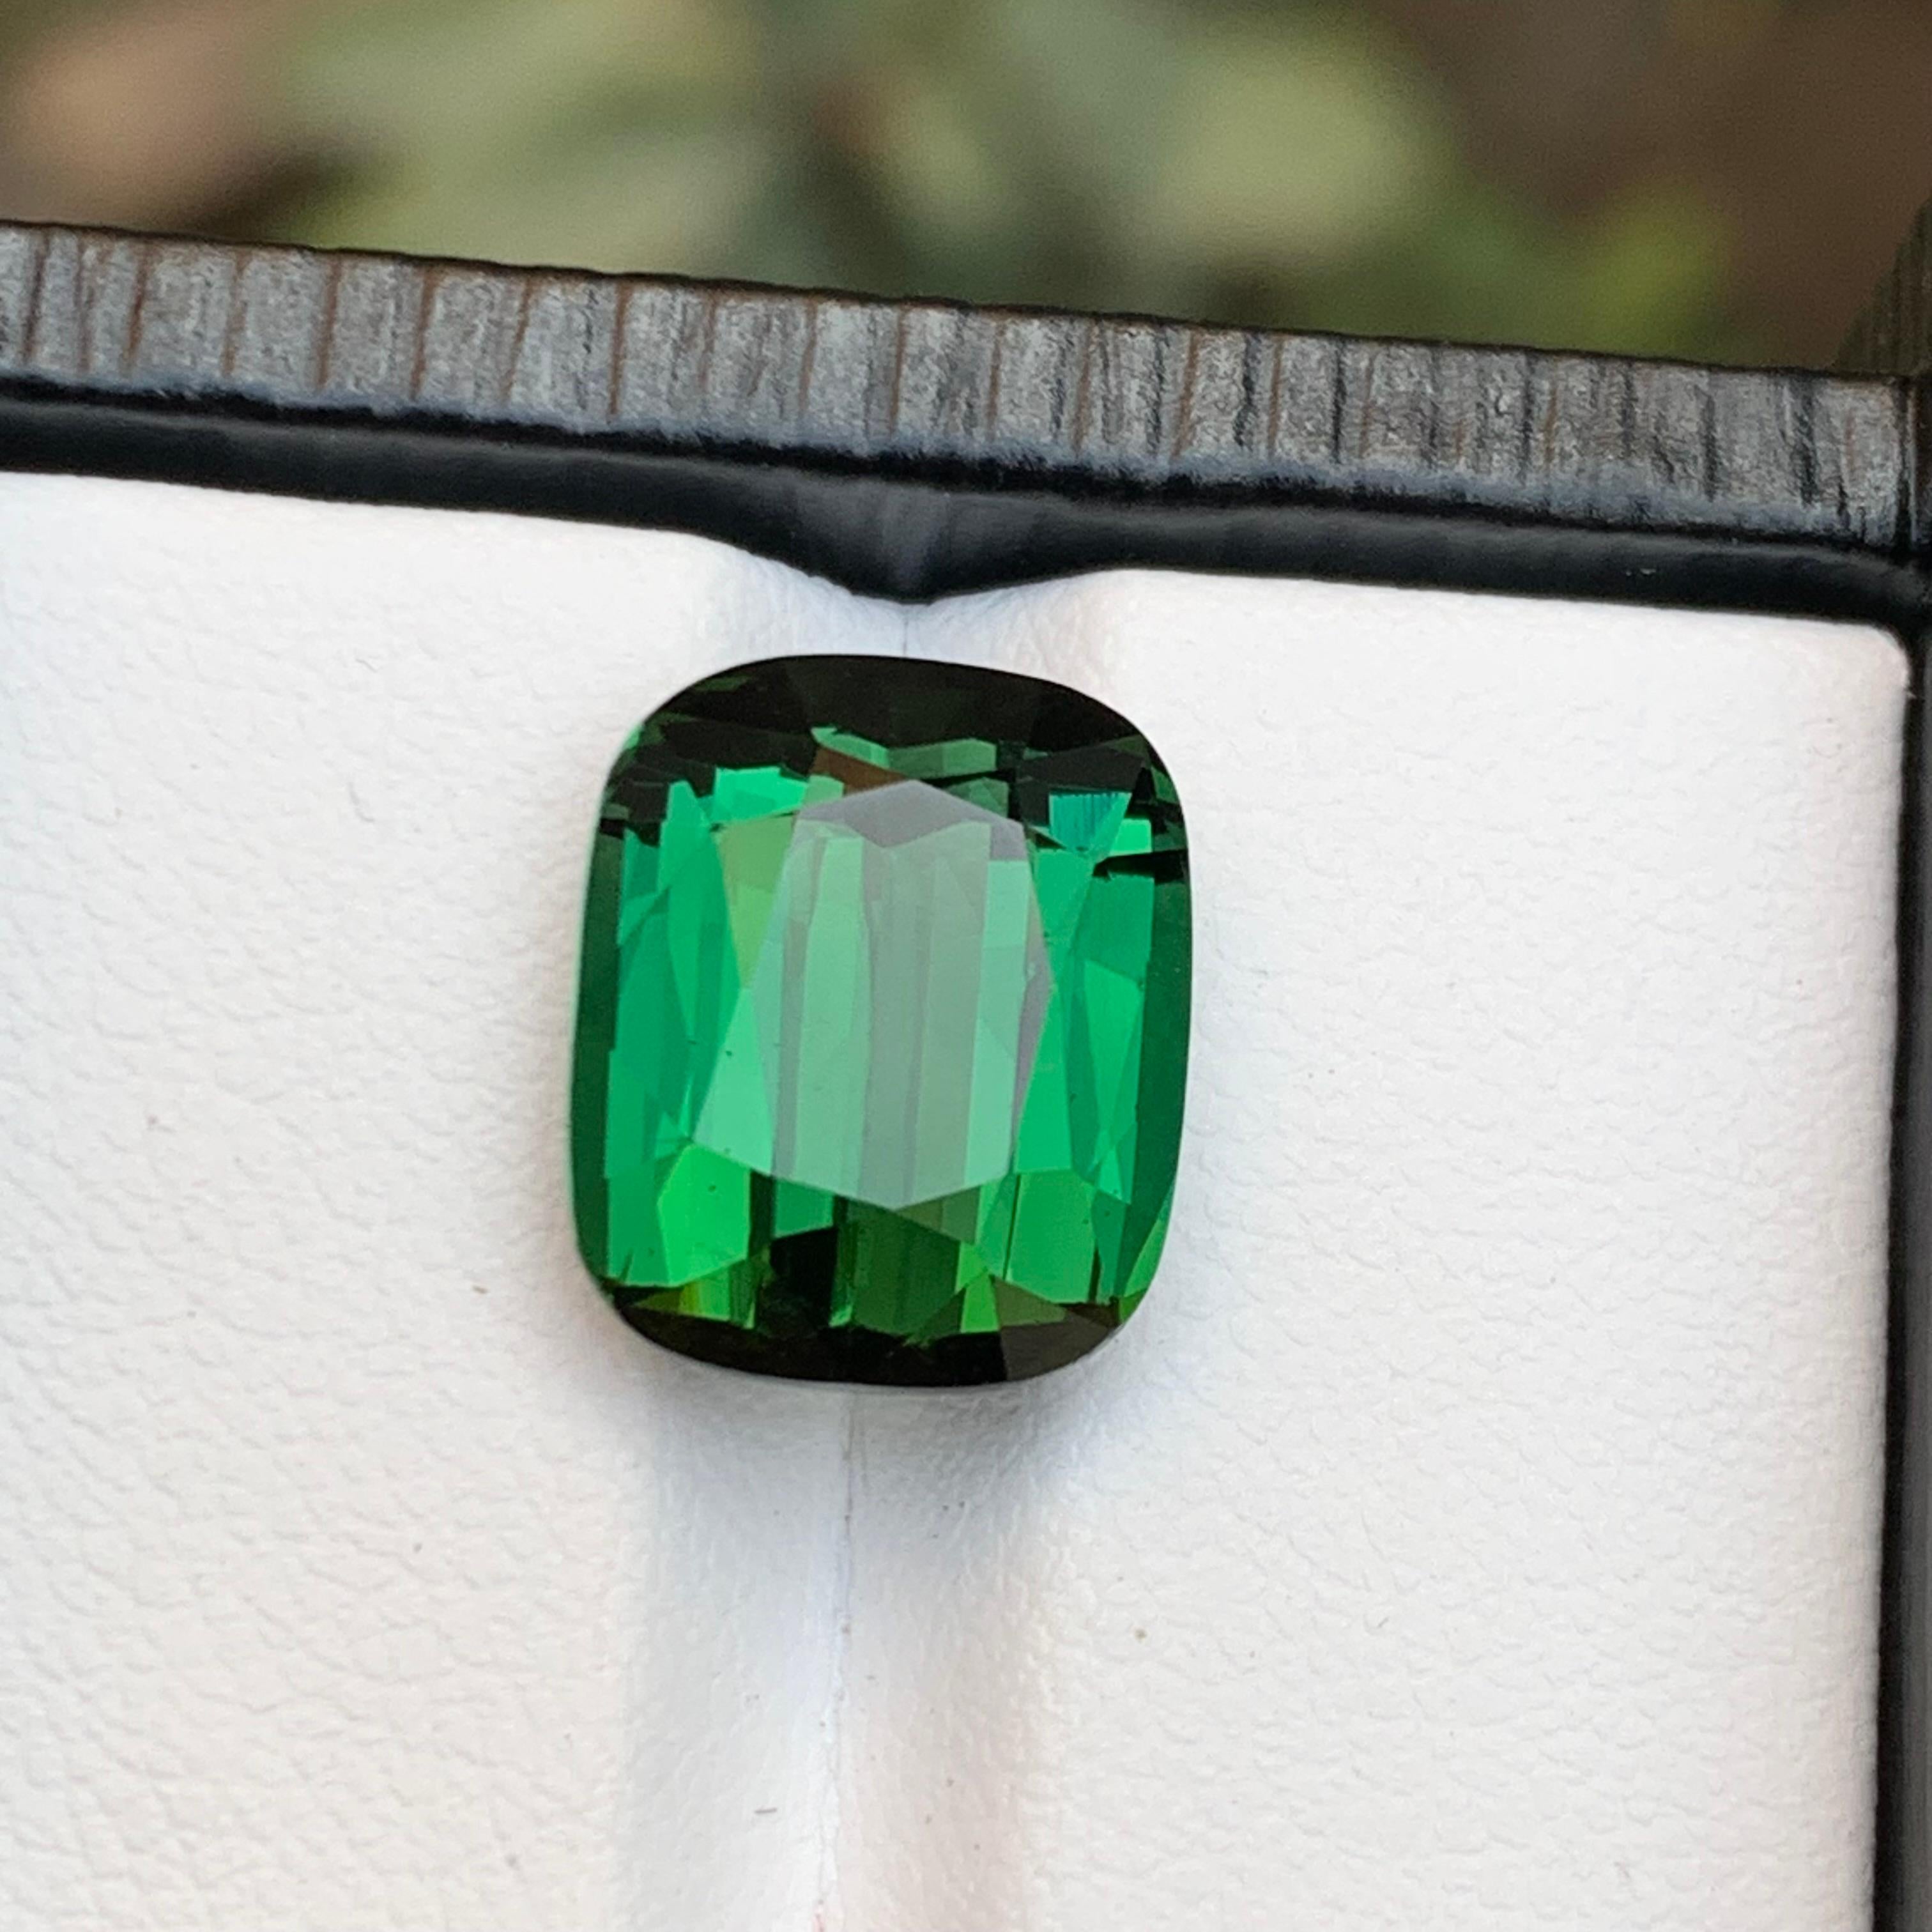 Rare Green Natural Tourmaline Gemstone, 7.65 Ct Cushion Cut for a Ring/Pendant For Sale 9